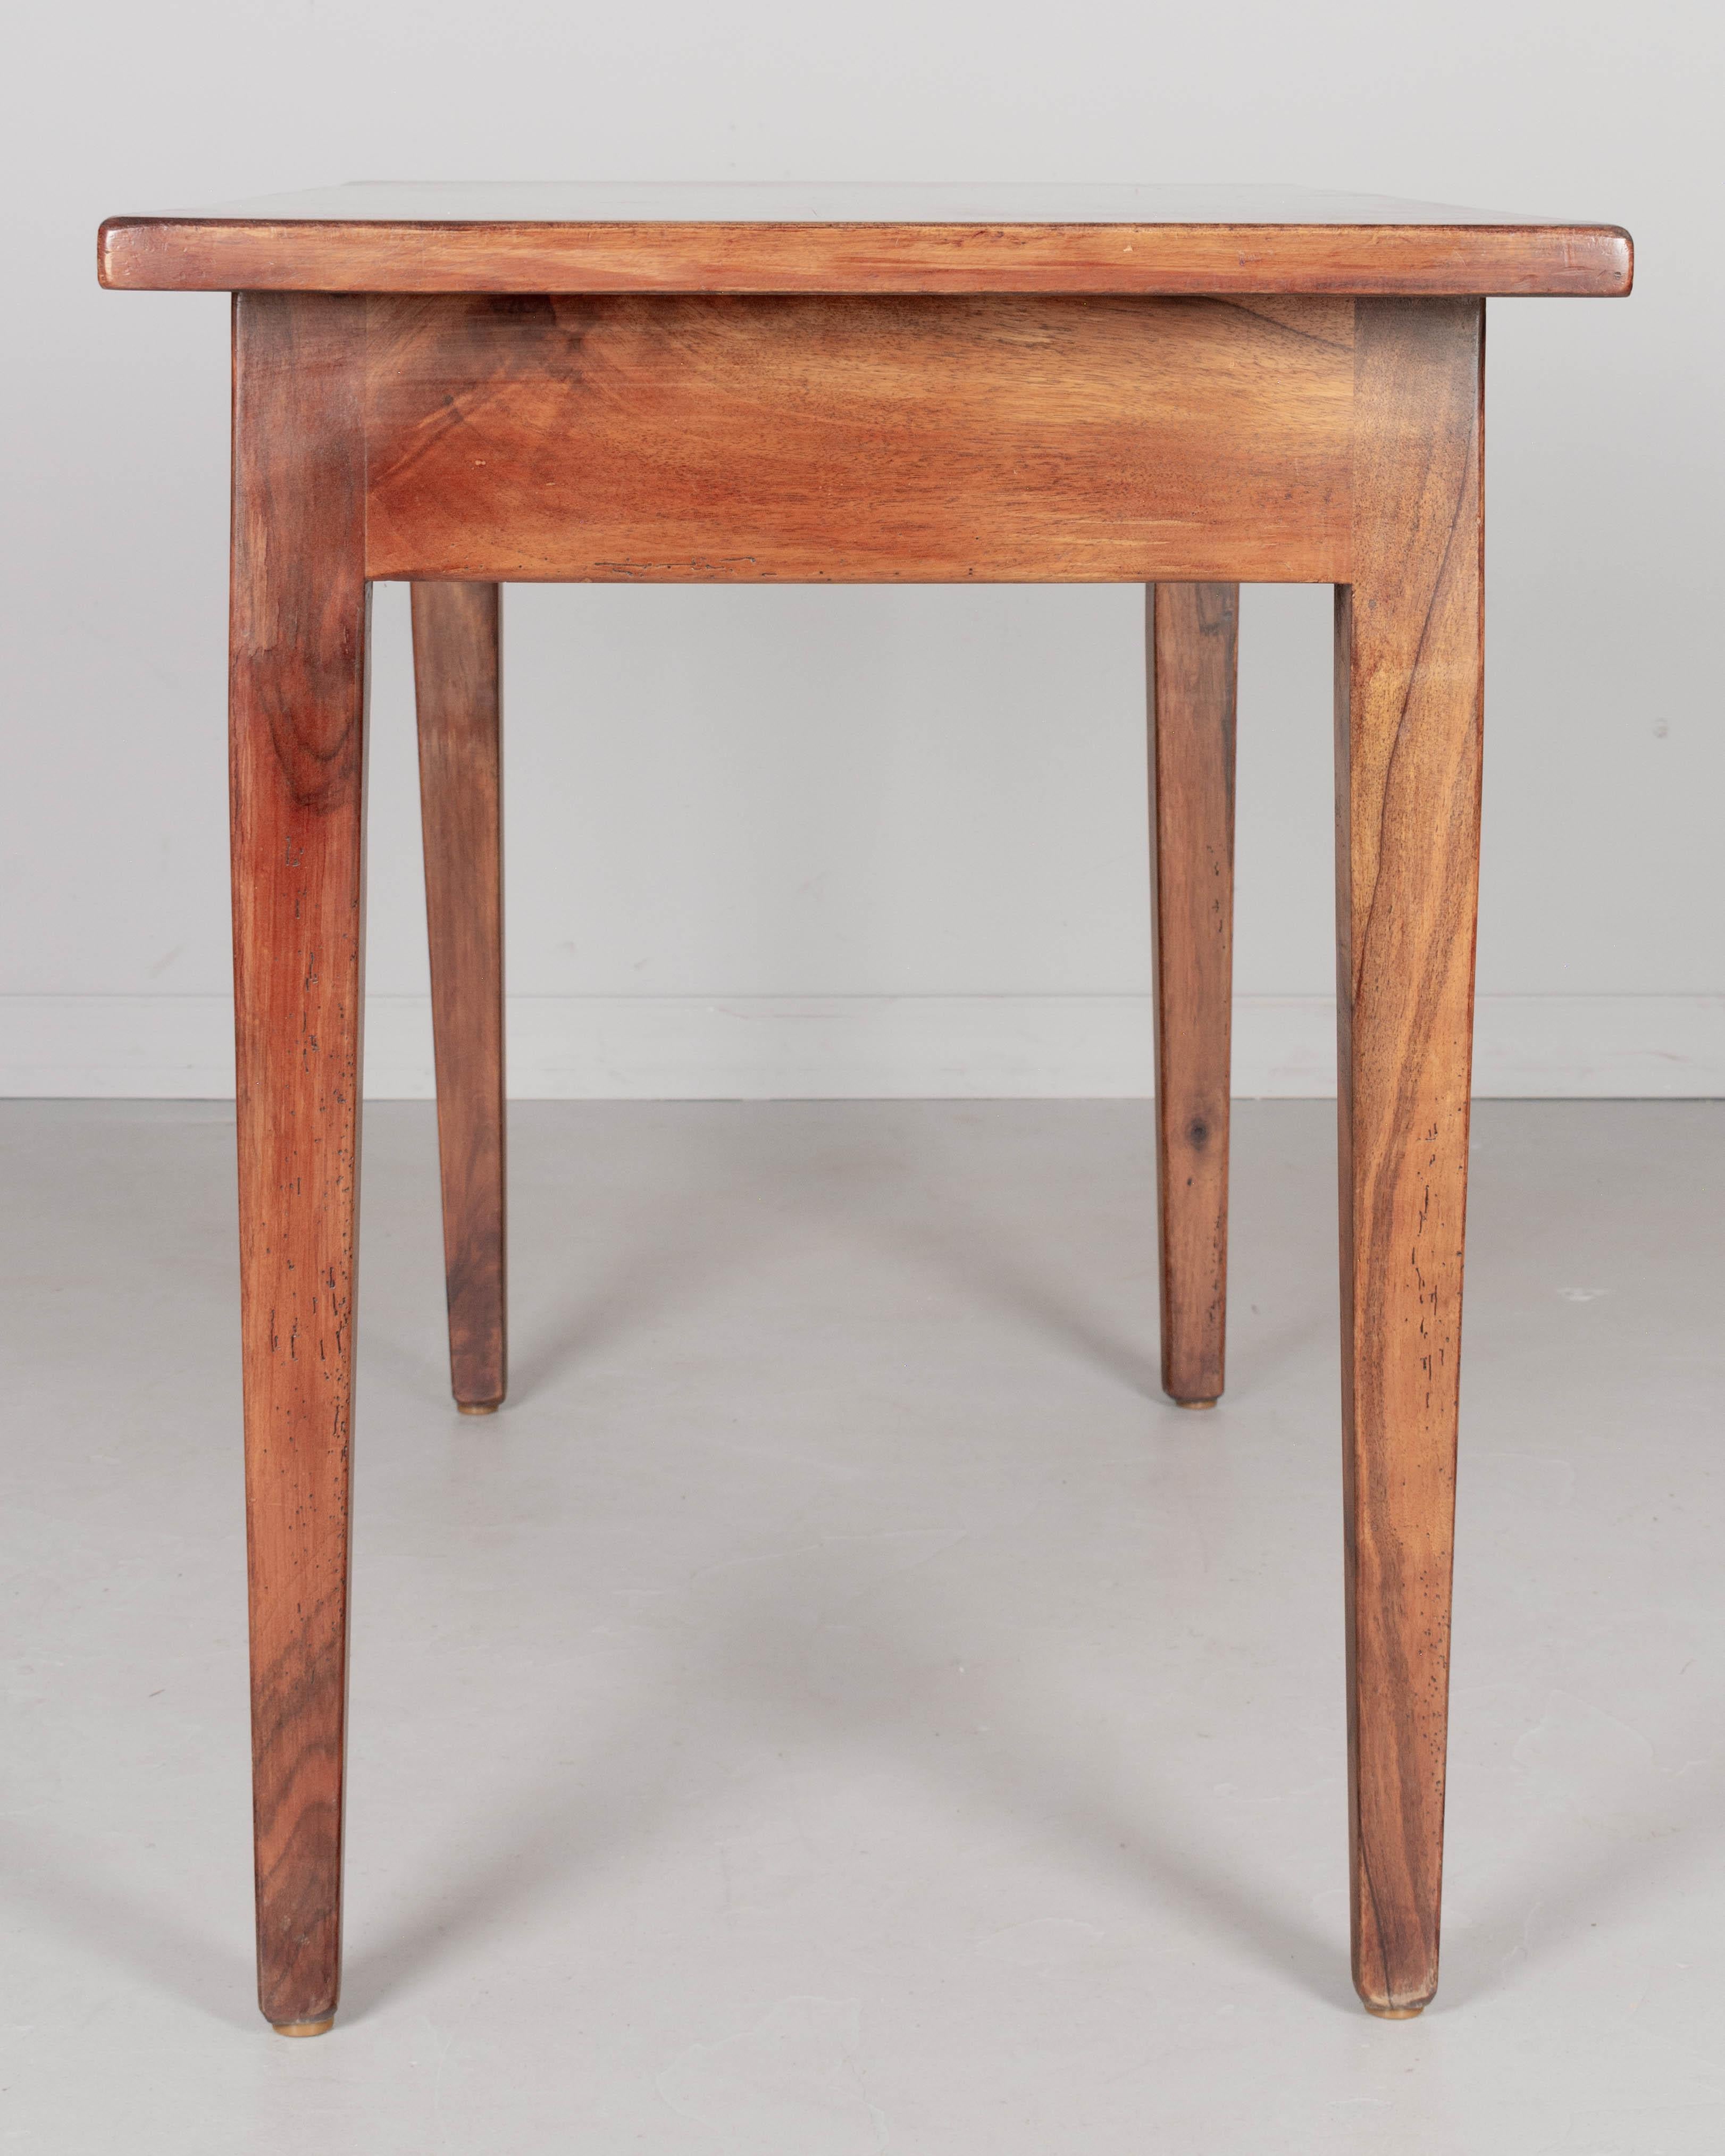 Walnut Country French Farm Table or Desk